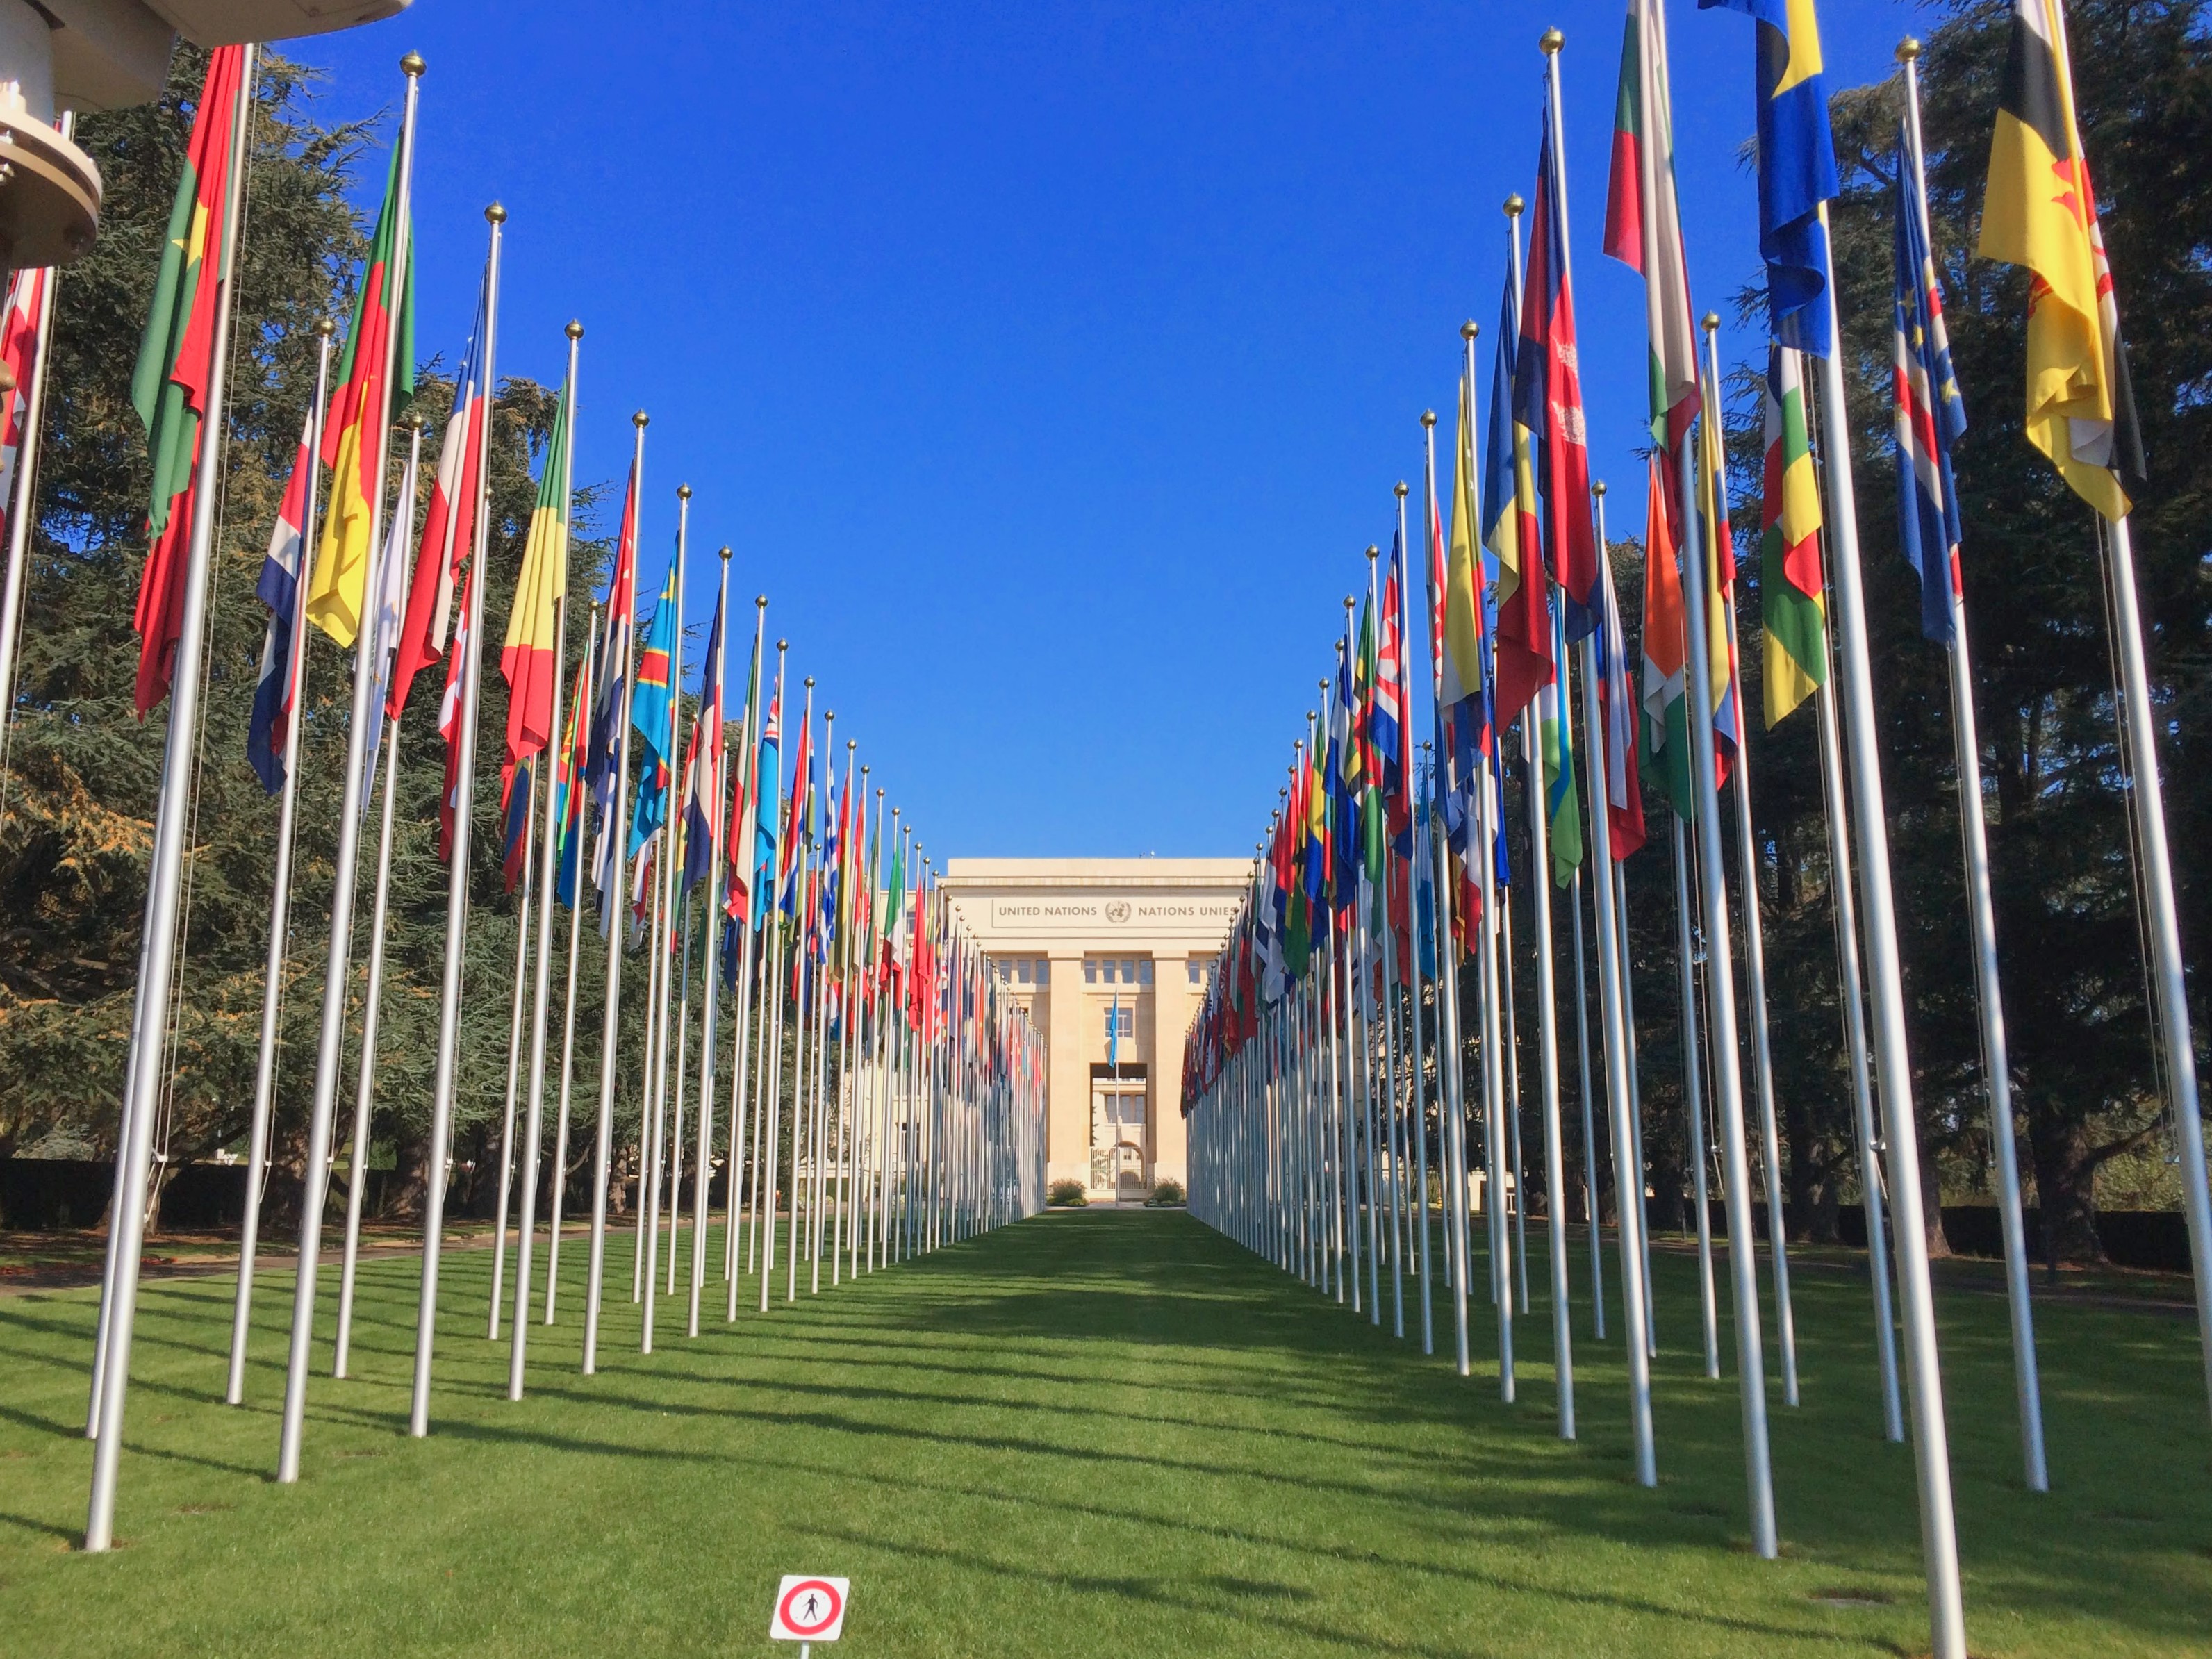 The Allée des Nations, with the flags of the member countries at the Palais des Nations, Geneva. Photo taken on October 8, 2016.